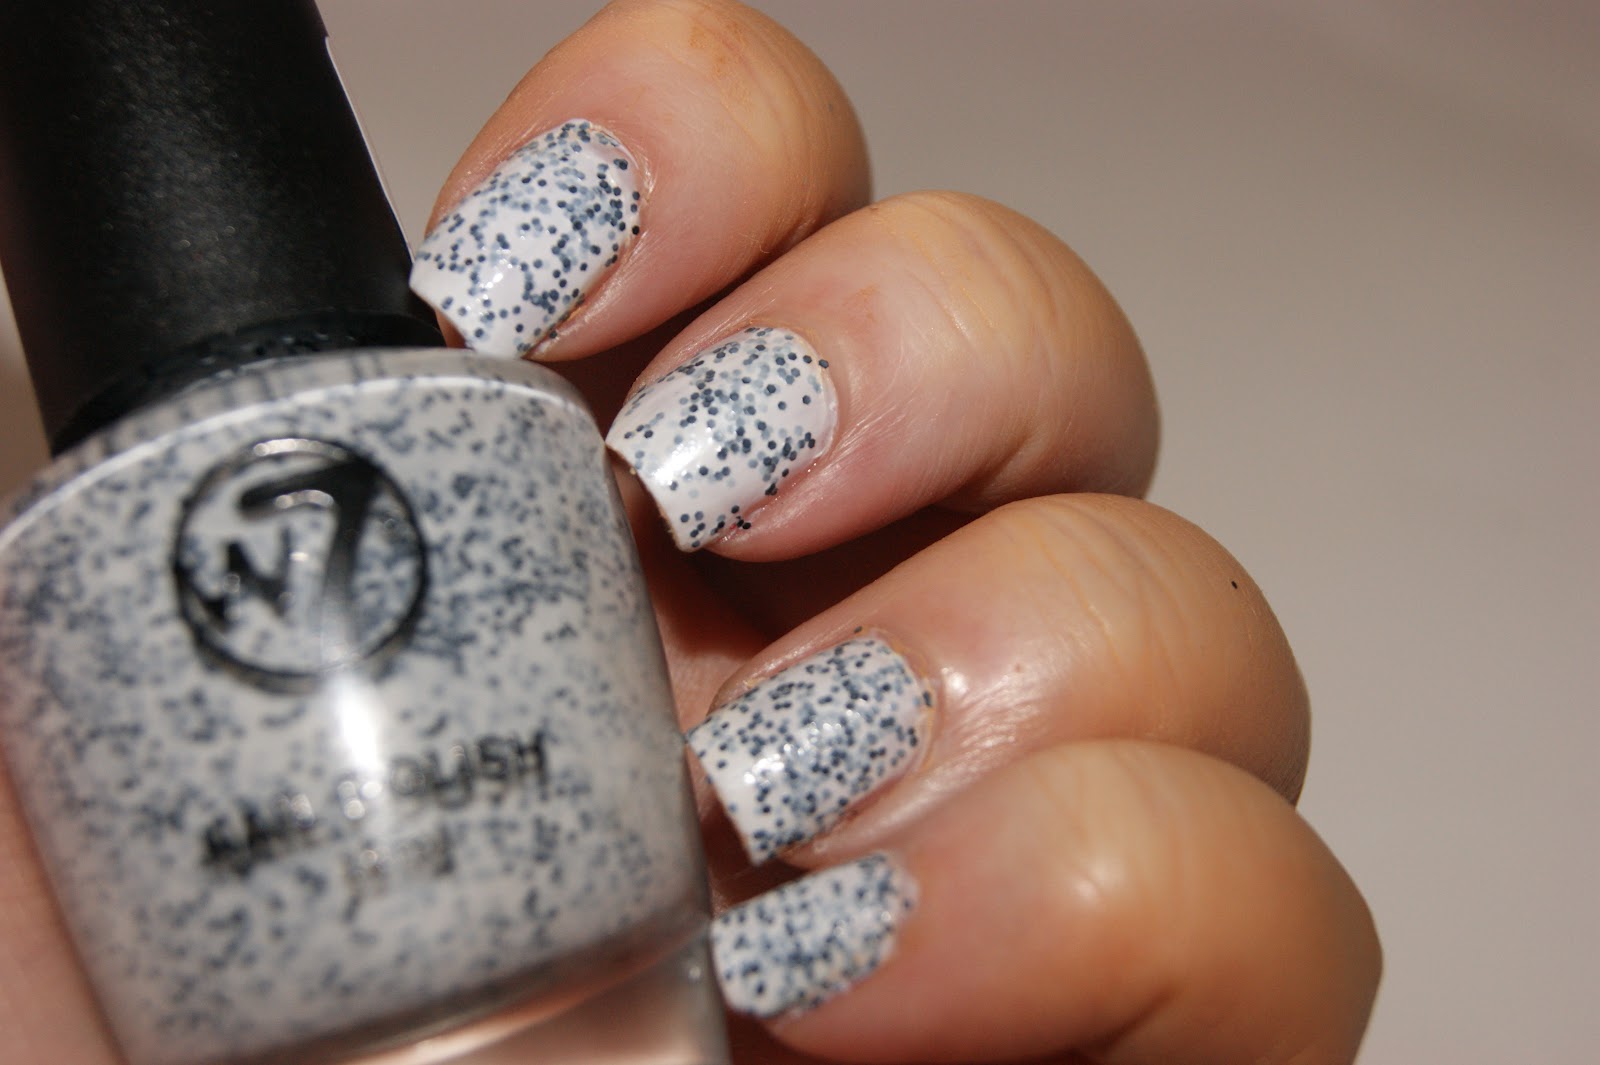 W7 New Glitter Polishes (Sprinkle Effect) - Review